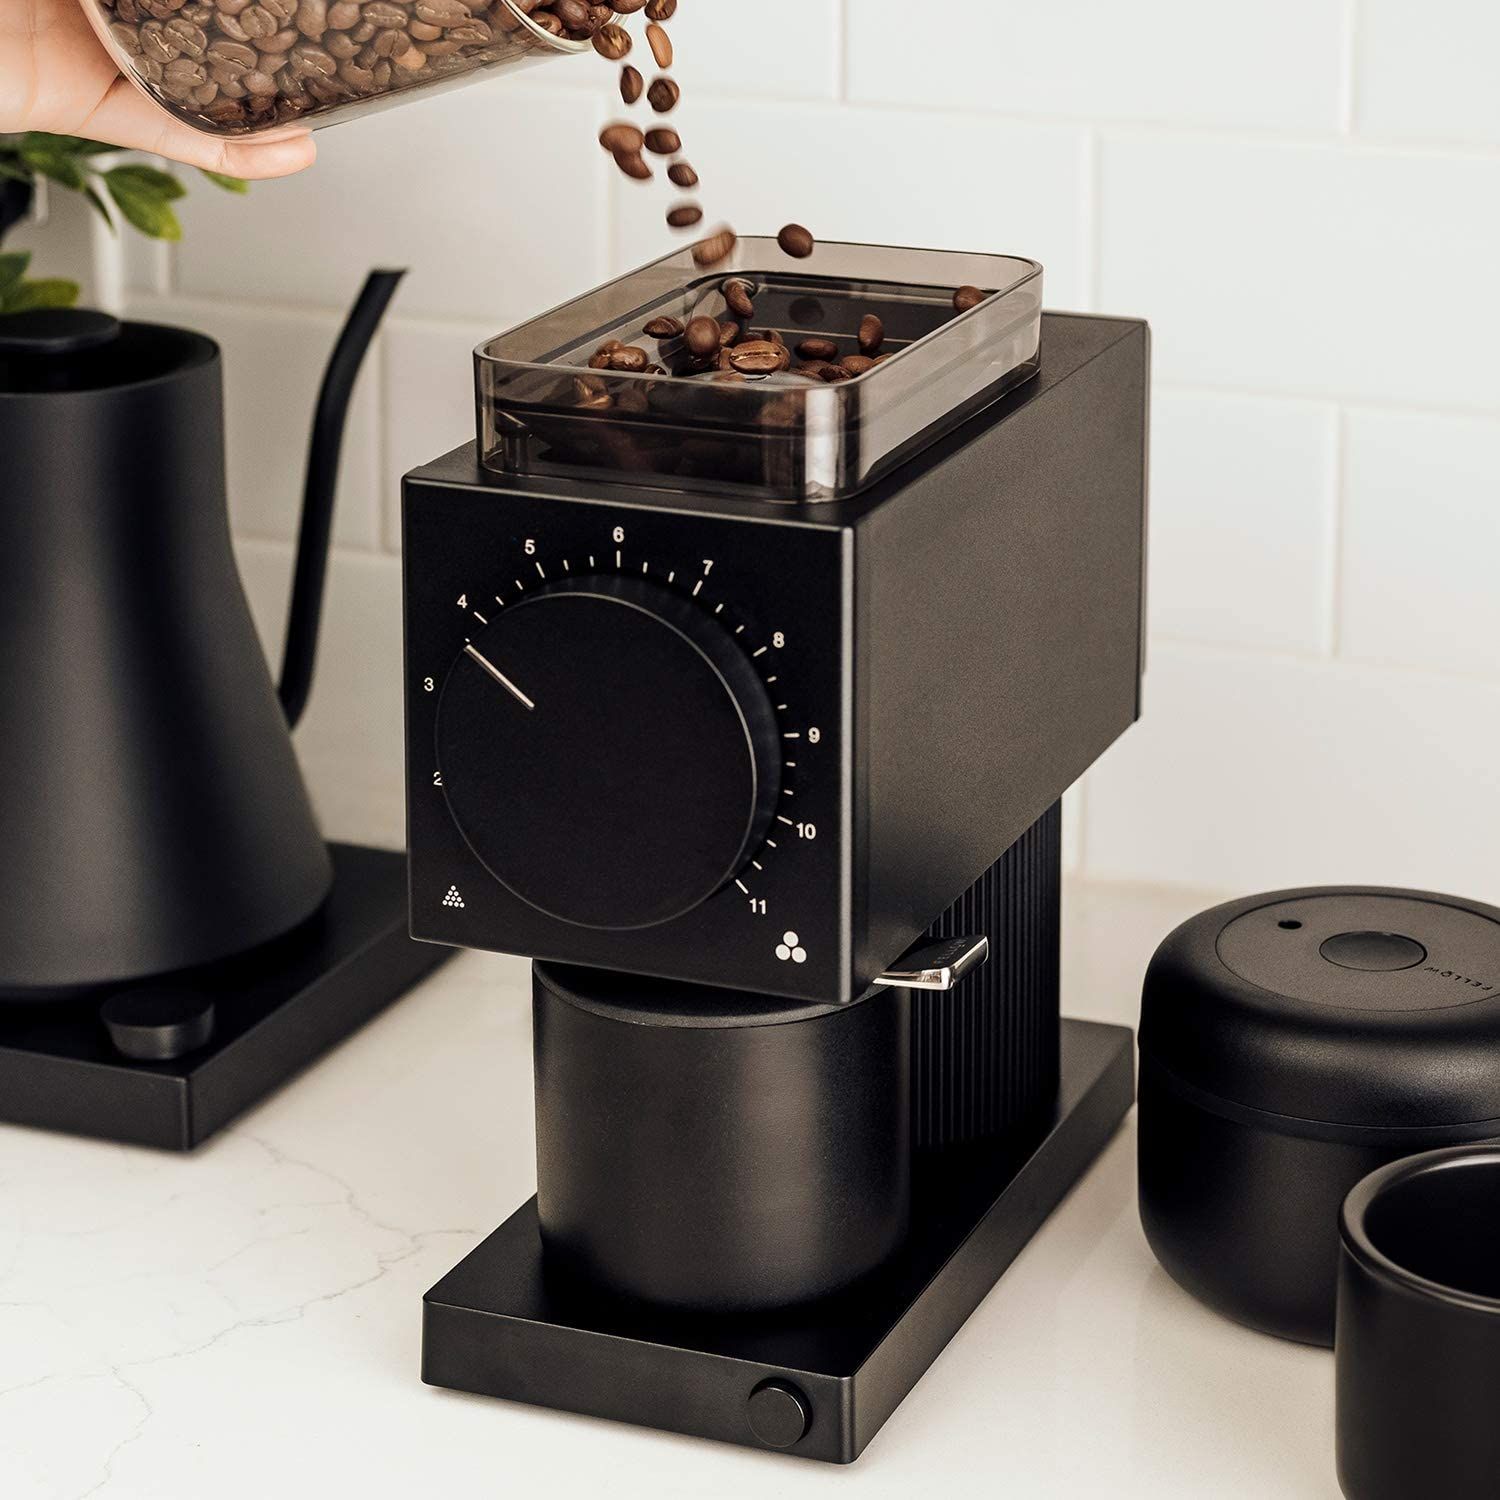 These Are the Essential Small Kitchen Appliances Every Home Needs